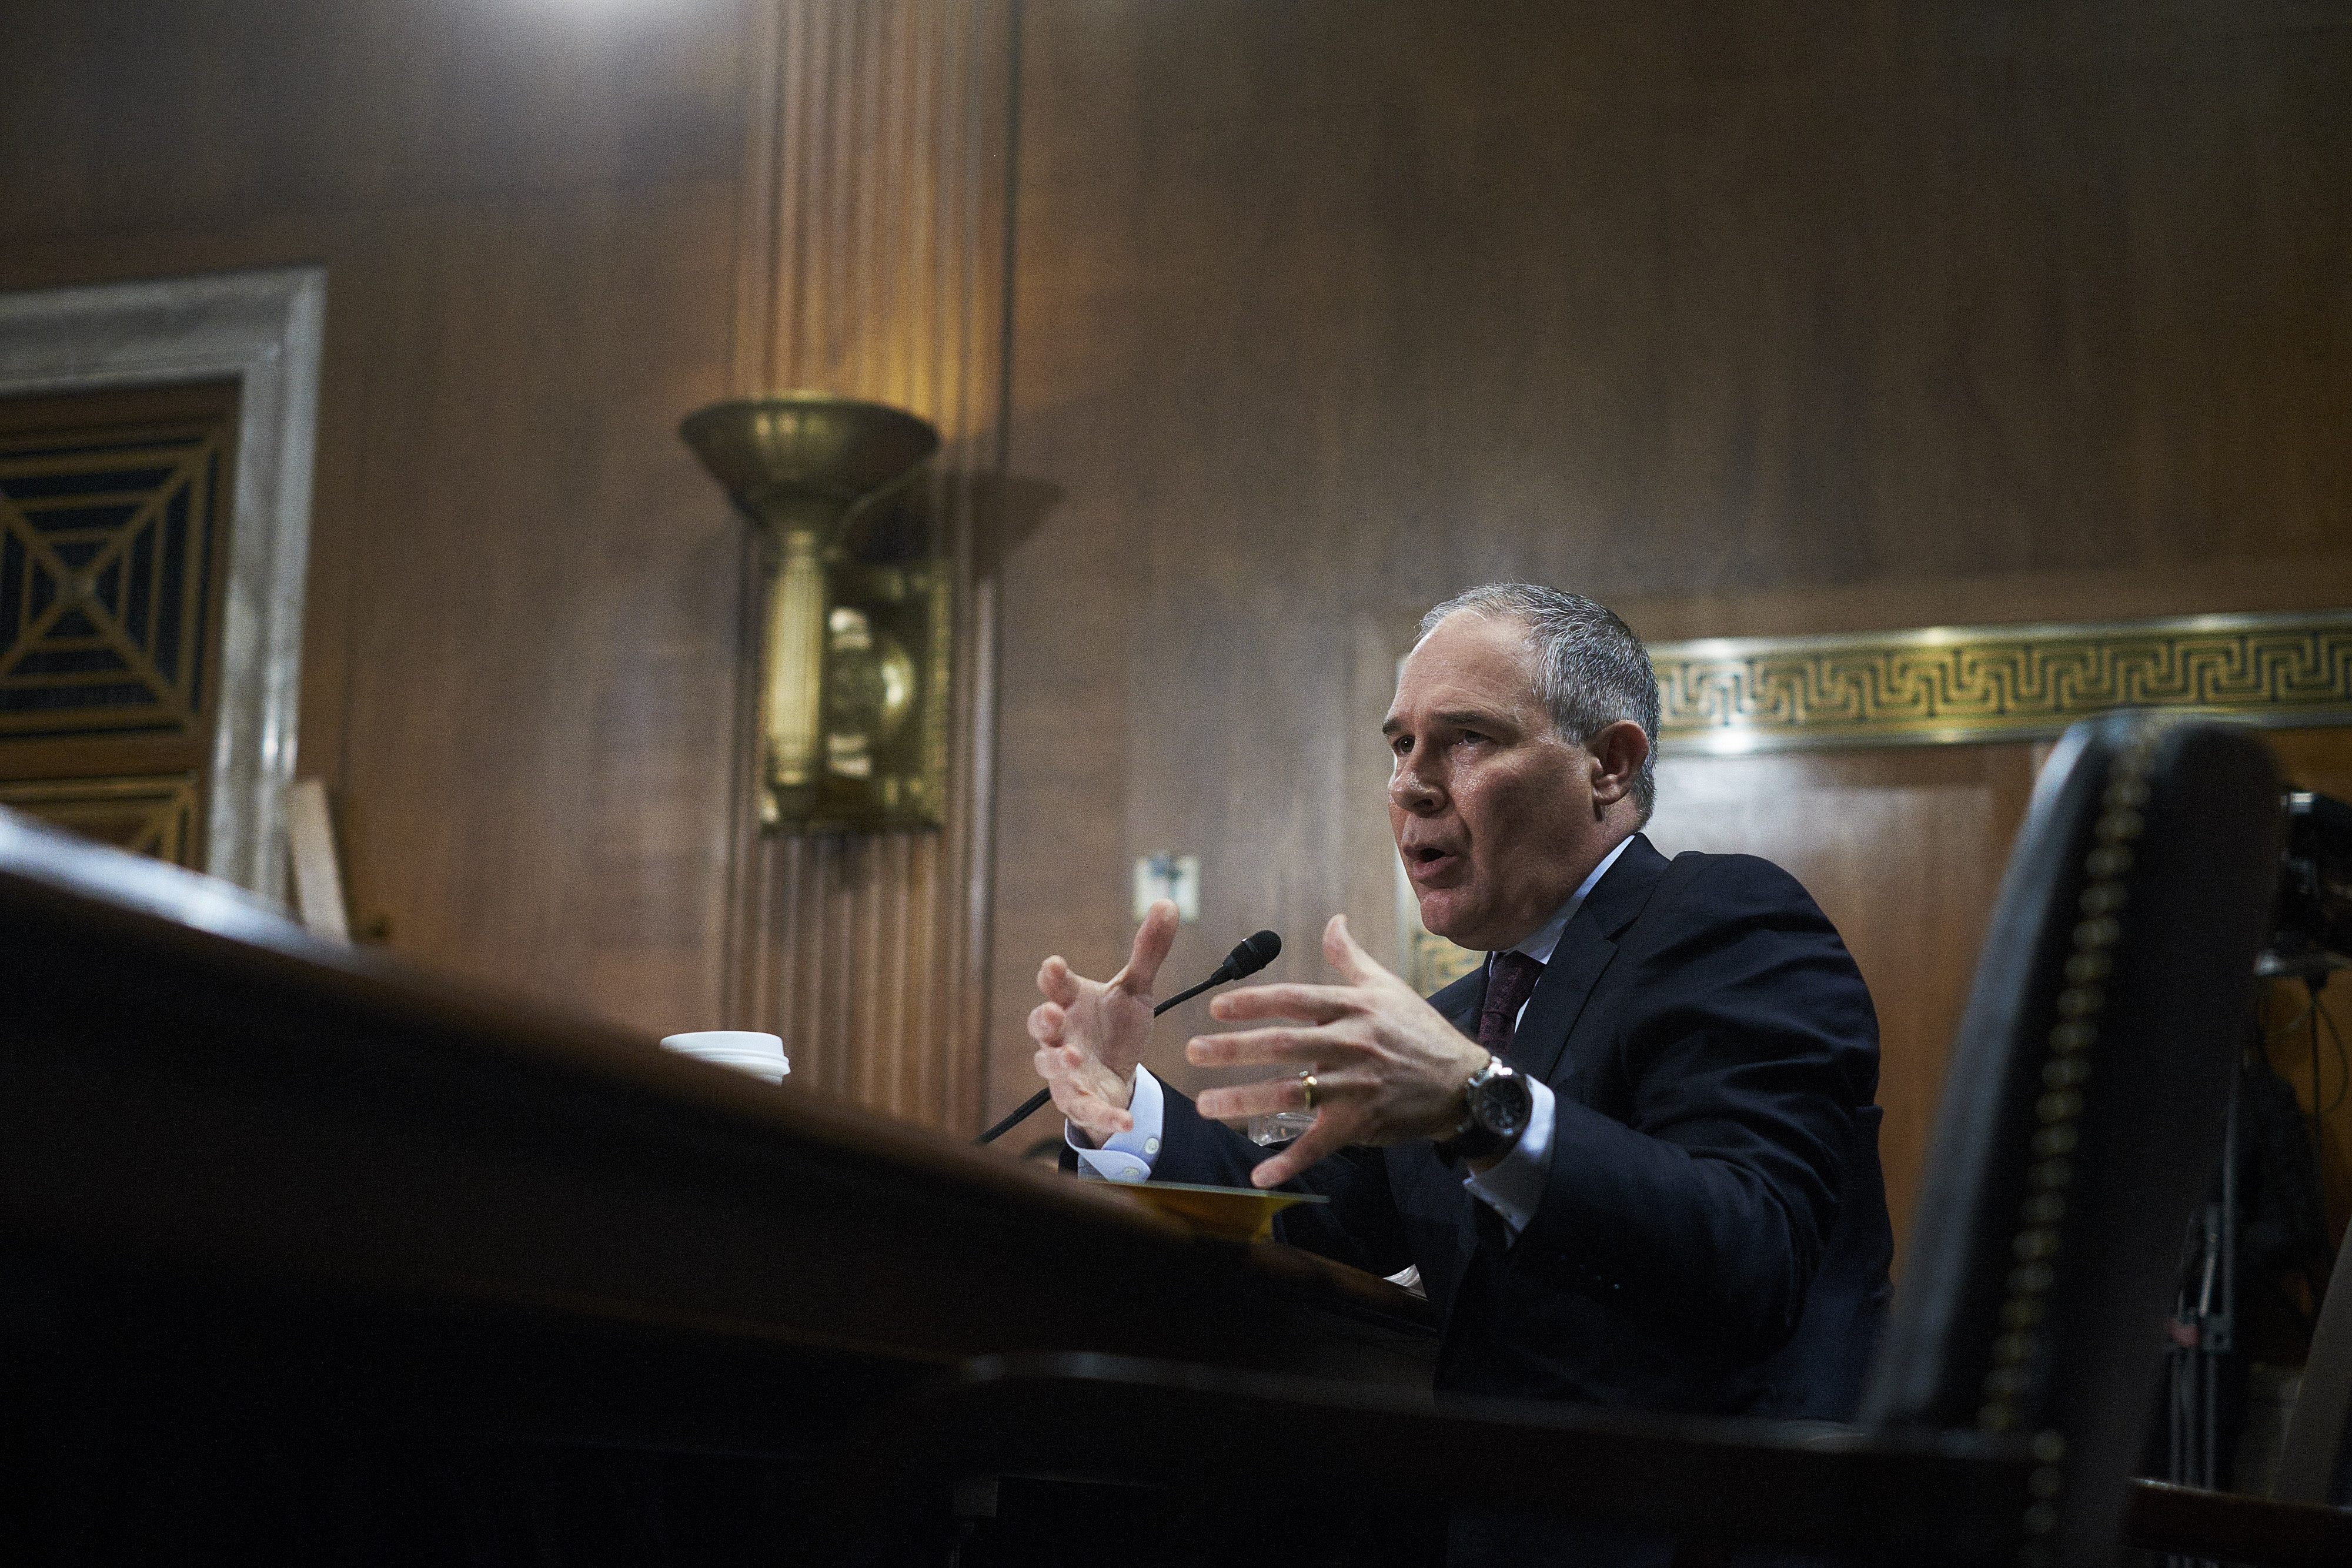 Oklahoma Attorney General Scott Pruitt, administrator of the Environmental Protection Agency (EPA) nominee speaks during a Senate hearing in Washington, D.C., on Jan. 18, 2017. (T.J. Kirkpatrick—Bloomberg/Getty Images)